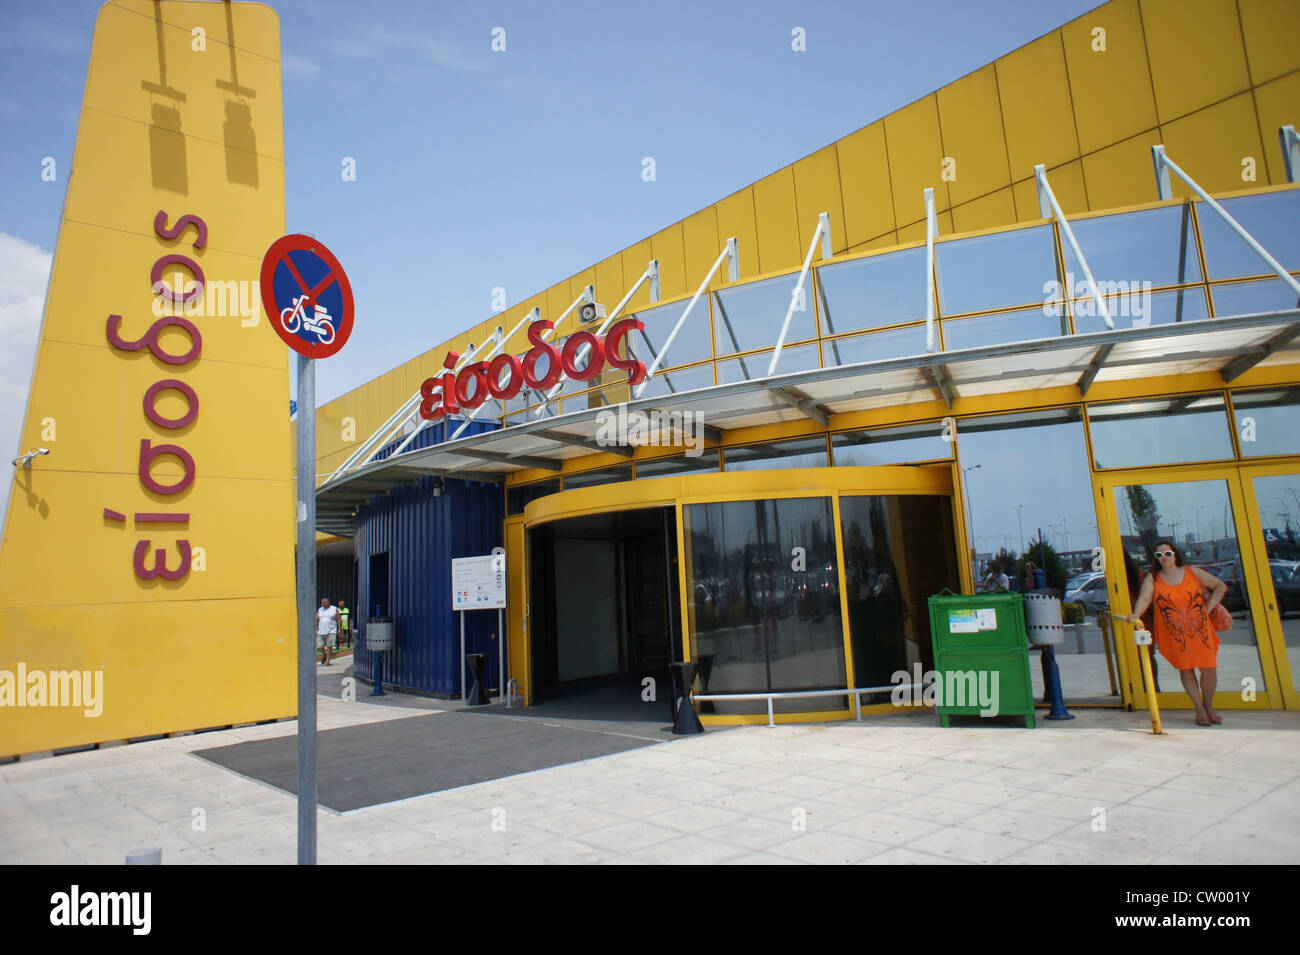 Ikea Entrance High Resolution Stock Photography and Images - Alamy